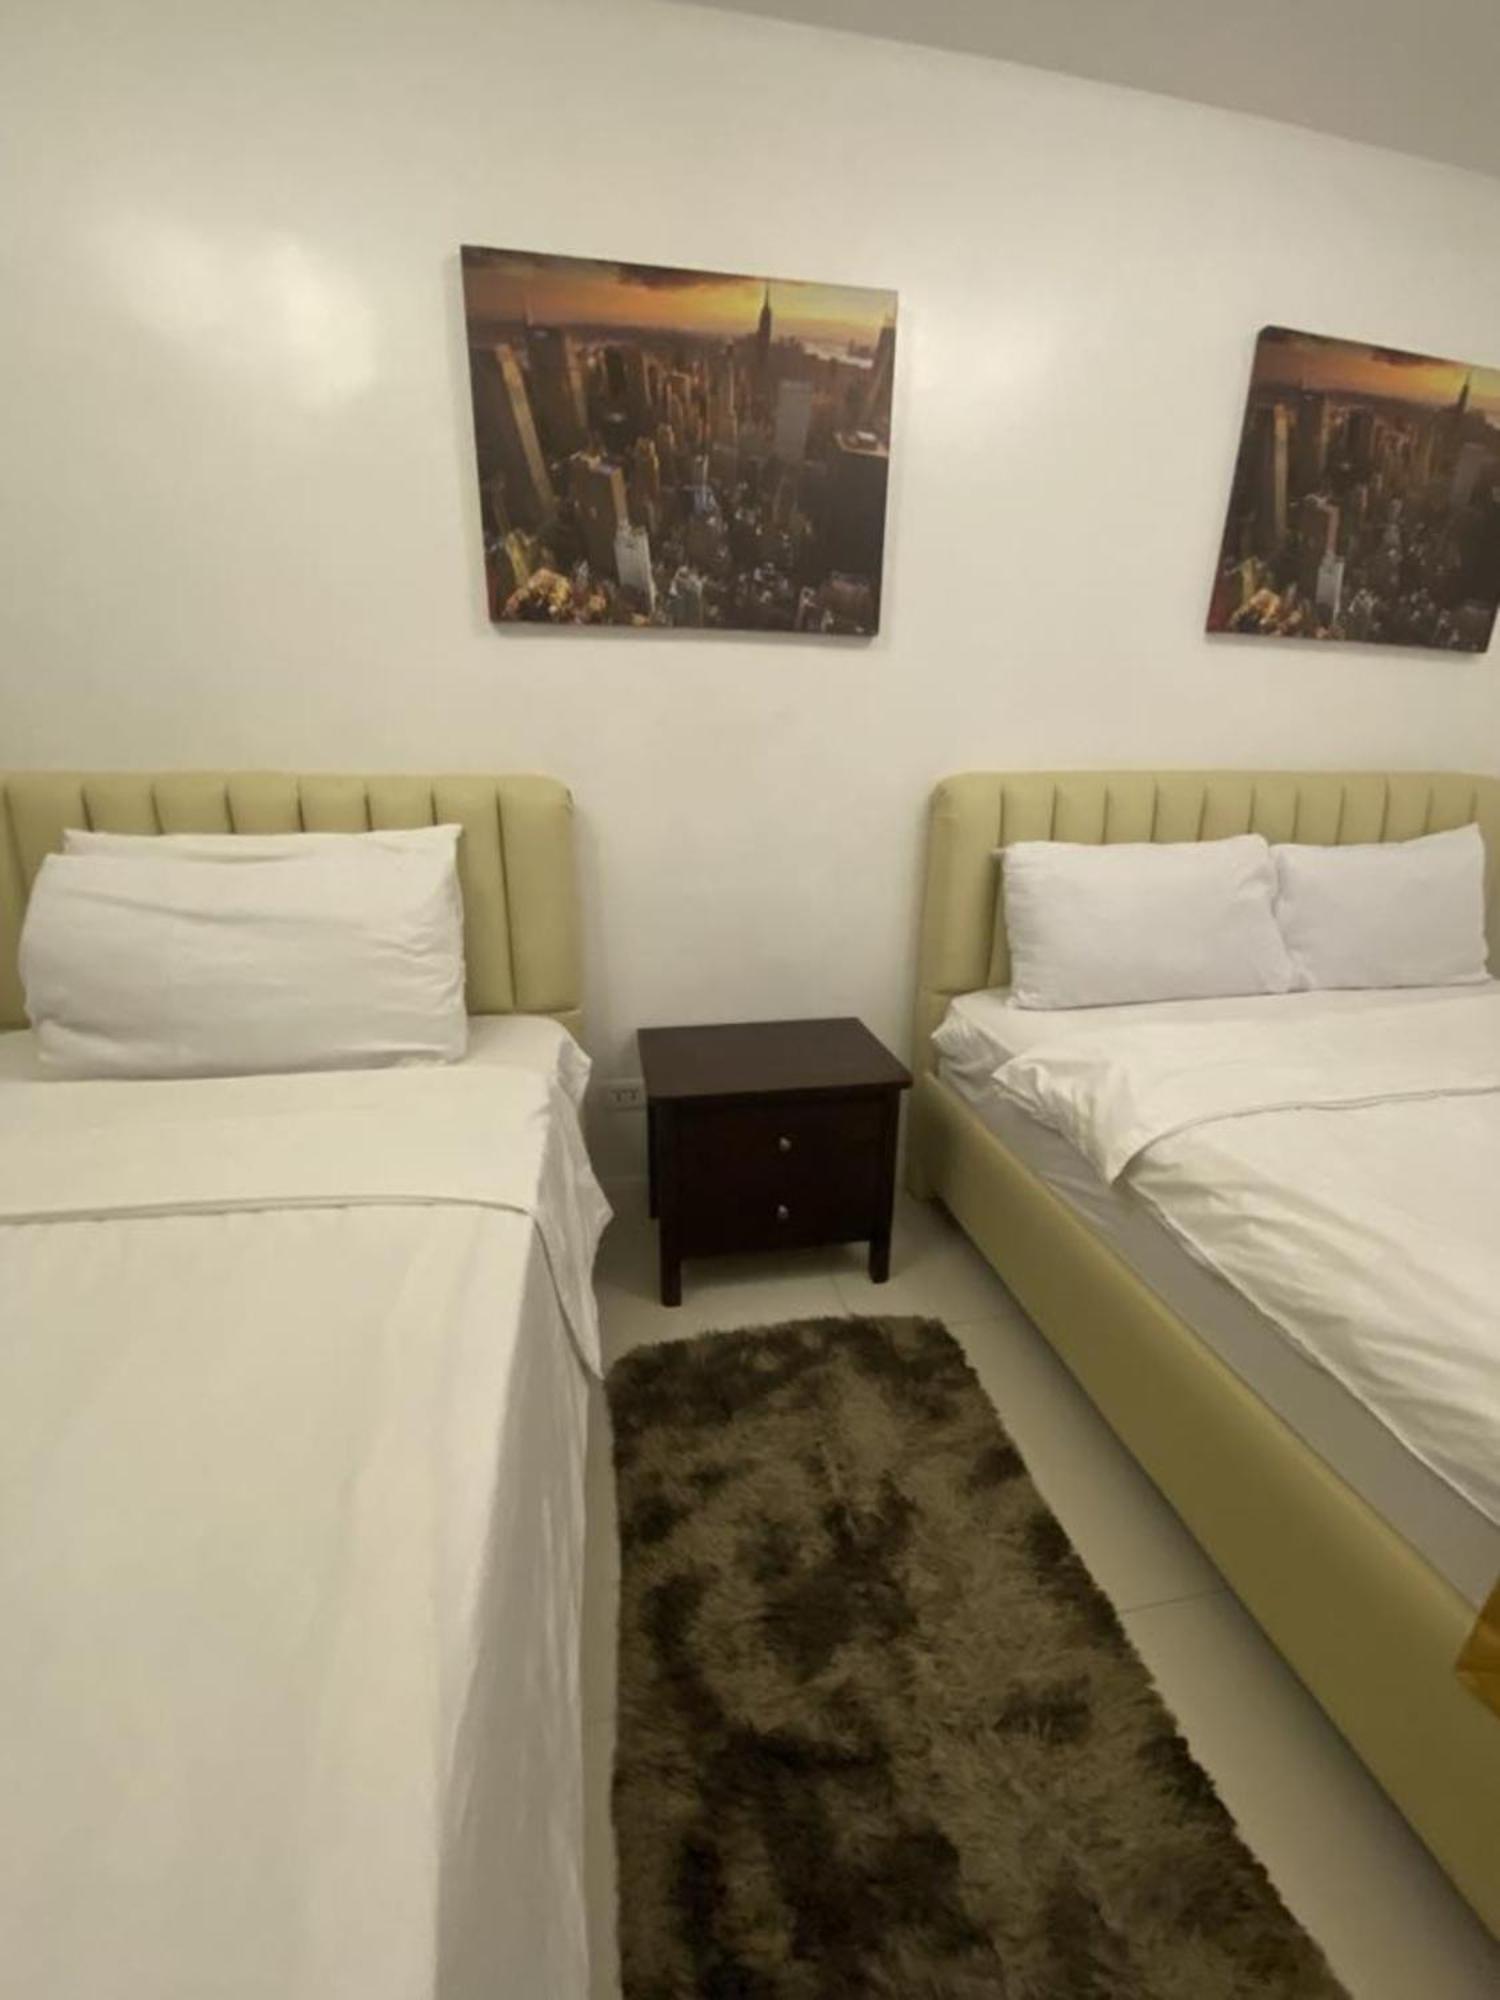 Discover Unmatched Luxury: 75% Off Deluxe Ocean-View Room In Central Manila, Free Pool & Sauna, Prime Location Near Us Embassy, Naia, Makati, Bgc, Mall Of Asia, Chinatown. Immerse In Elegance With Balcony. Limited-Time Offer - Book Now Exterior photo